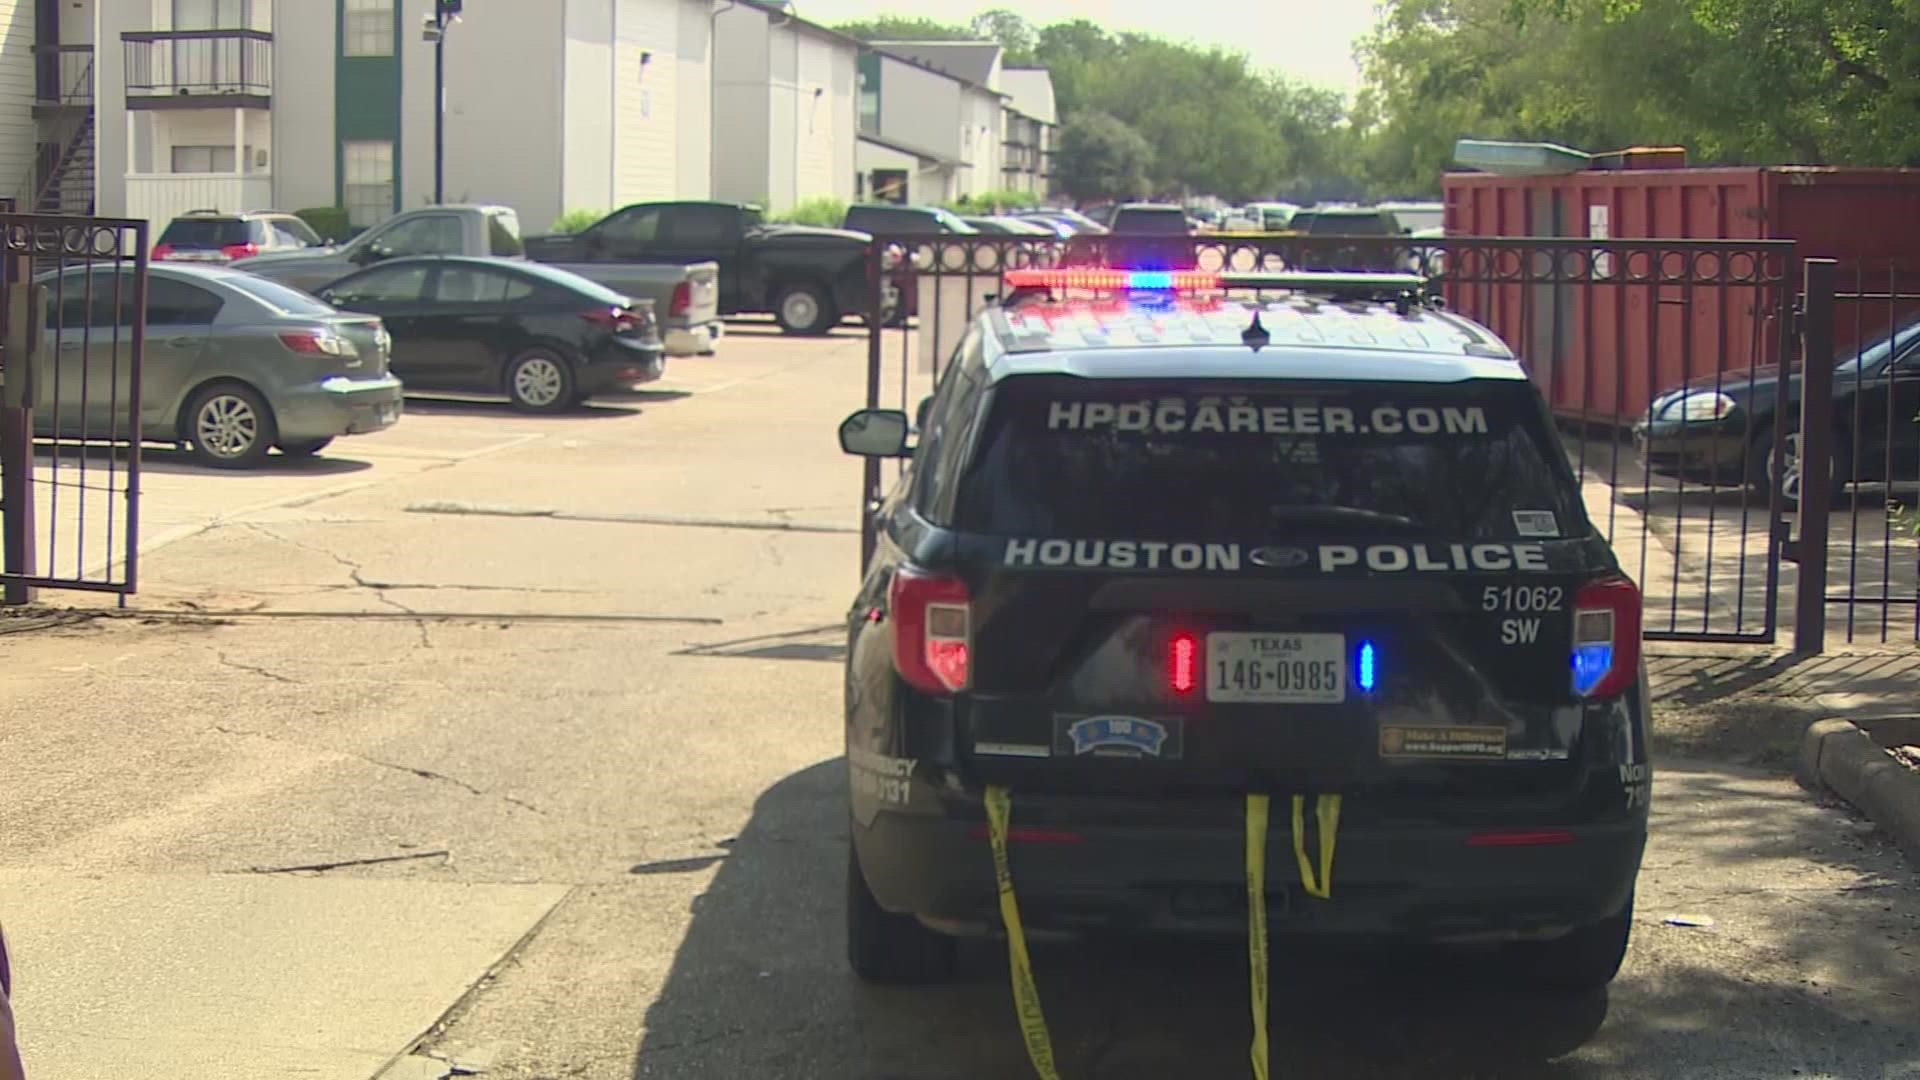 A man is dead after being shot by U.S. Marshals task force members at an apartment complex in southwest Houston Friday morning, according to HPD.